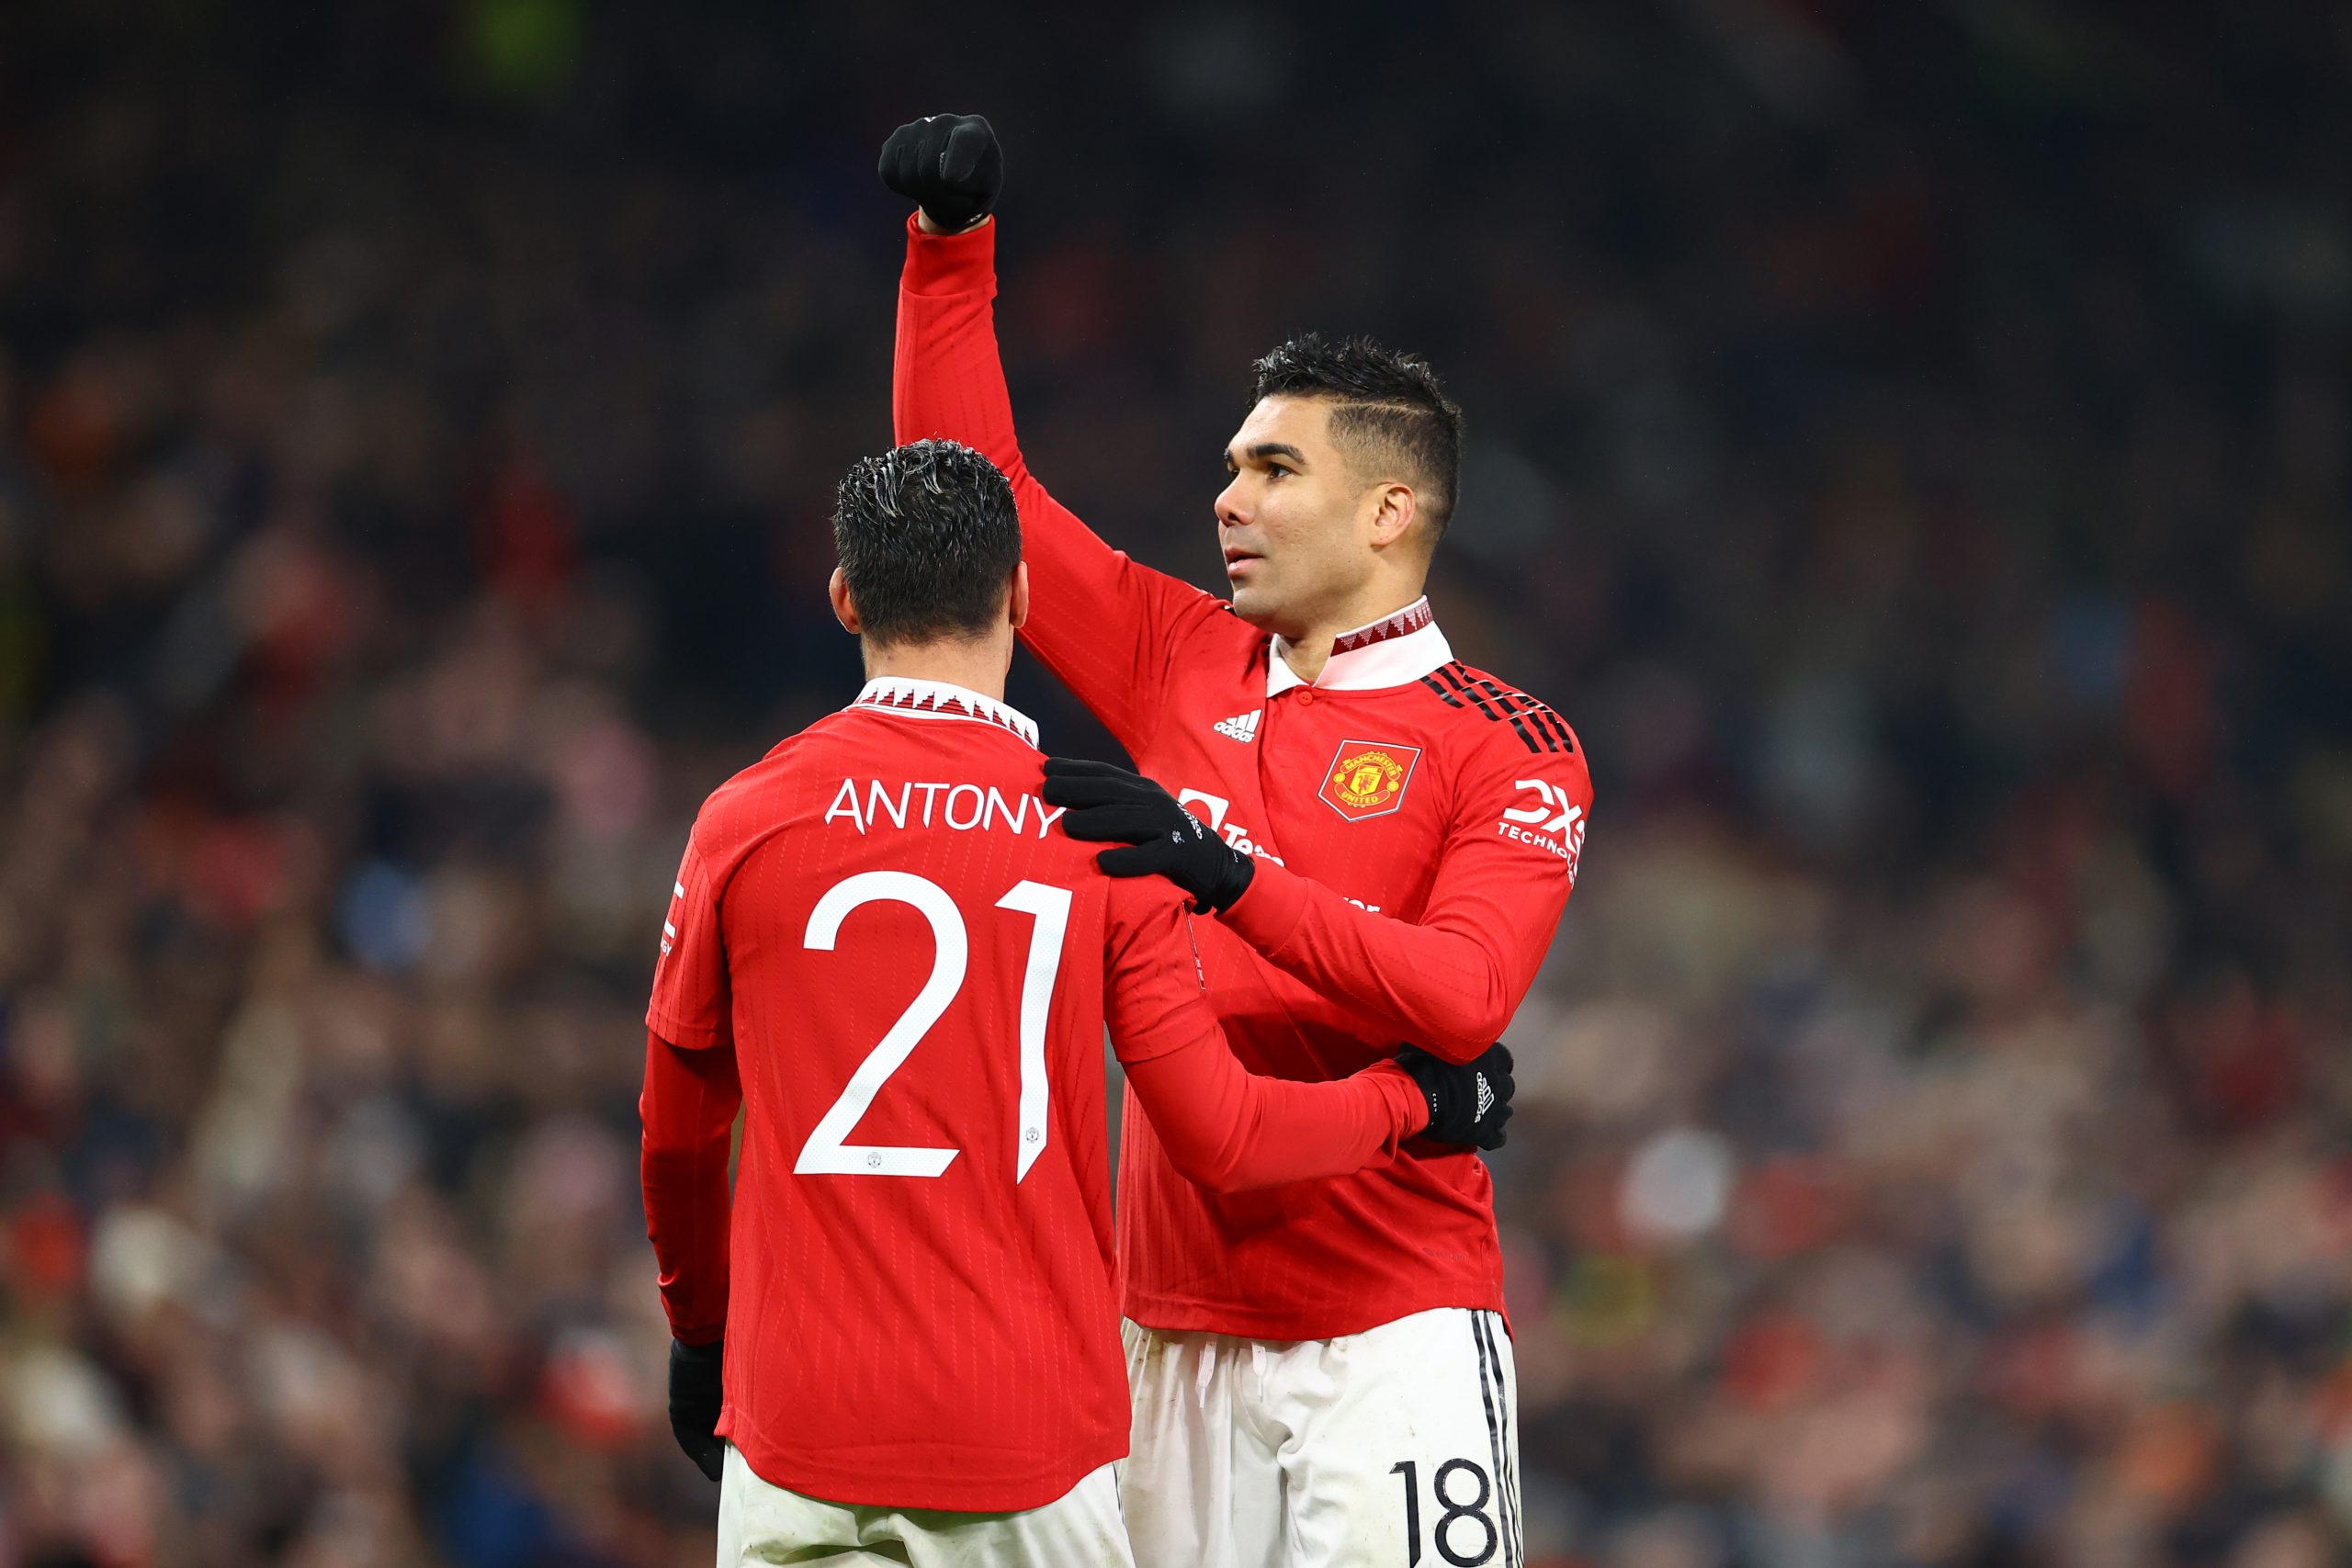 MANCHESTER, ENGLAND - JANUARY 28: Casemiro of Manchester United celebrates with teammate Antony after scoring the team's first goal during the Emirates FA Cup Fourth Round match between Manchester United and Reading at Old Trafford on January 28, 2023 in Manchester, England. (Photo by Michael Steele/Getty Images)